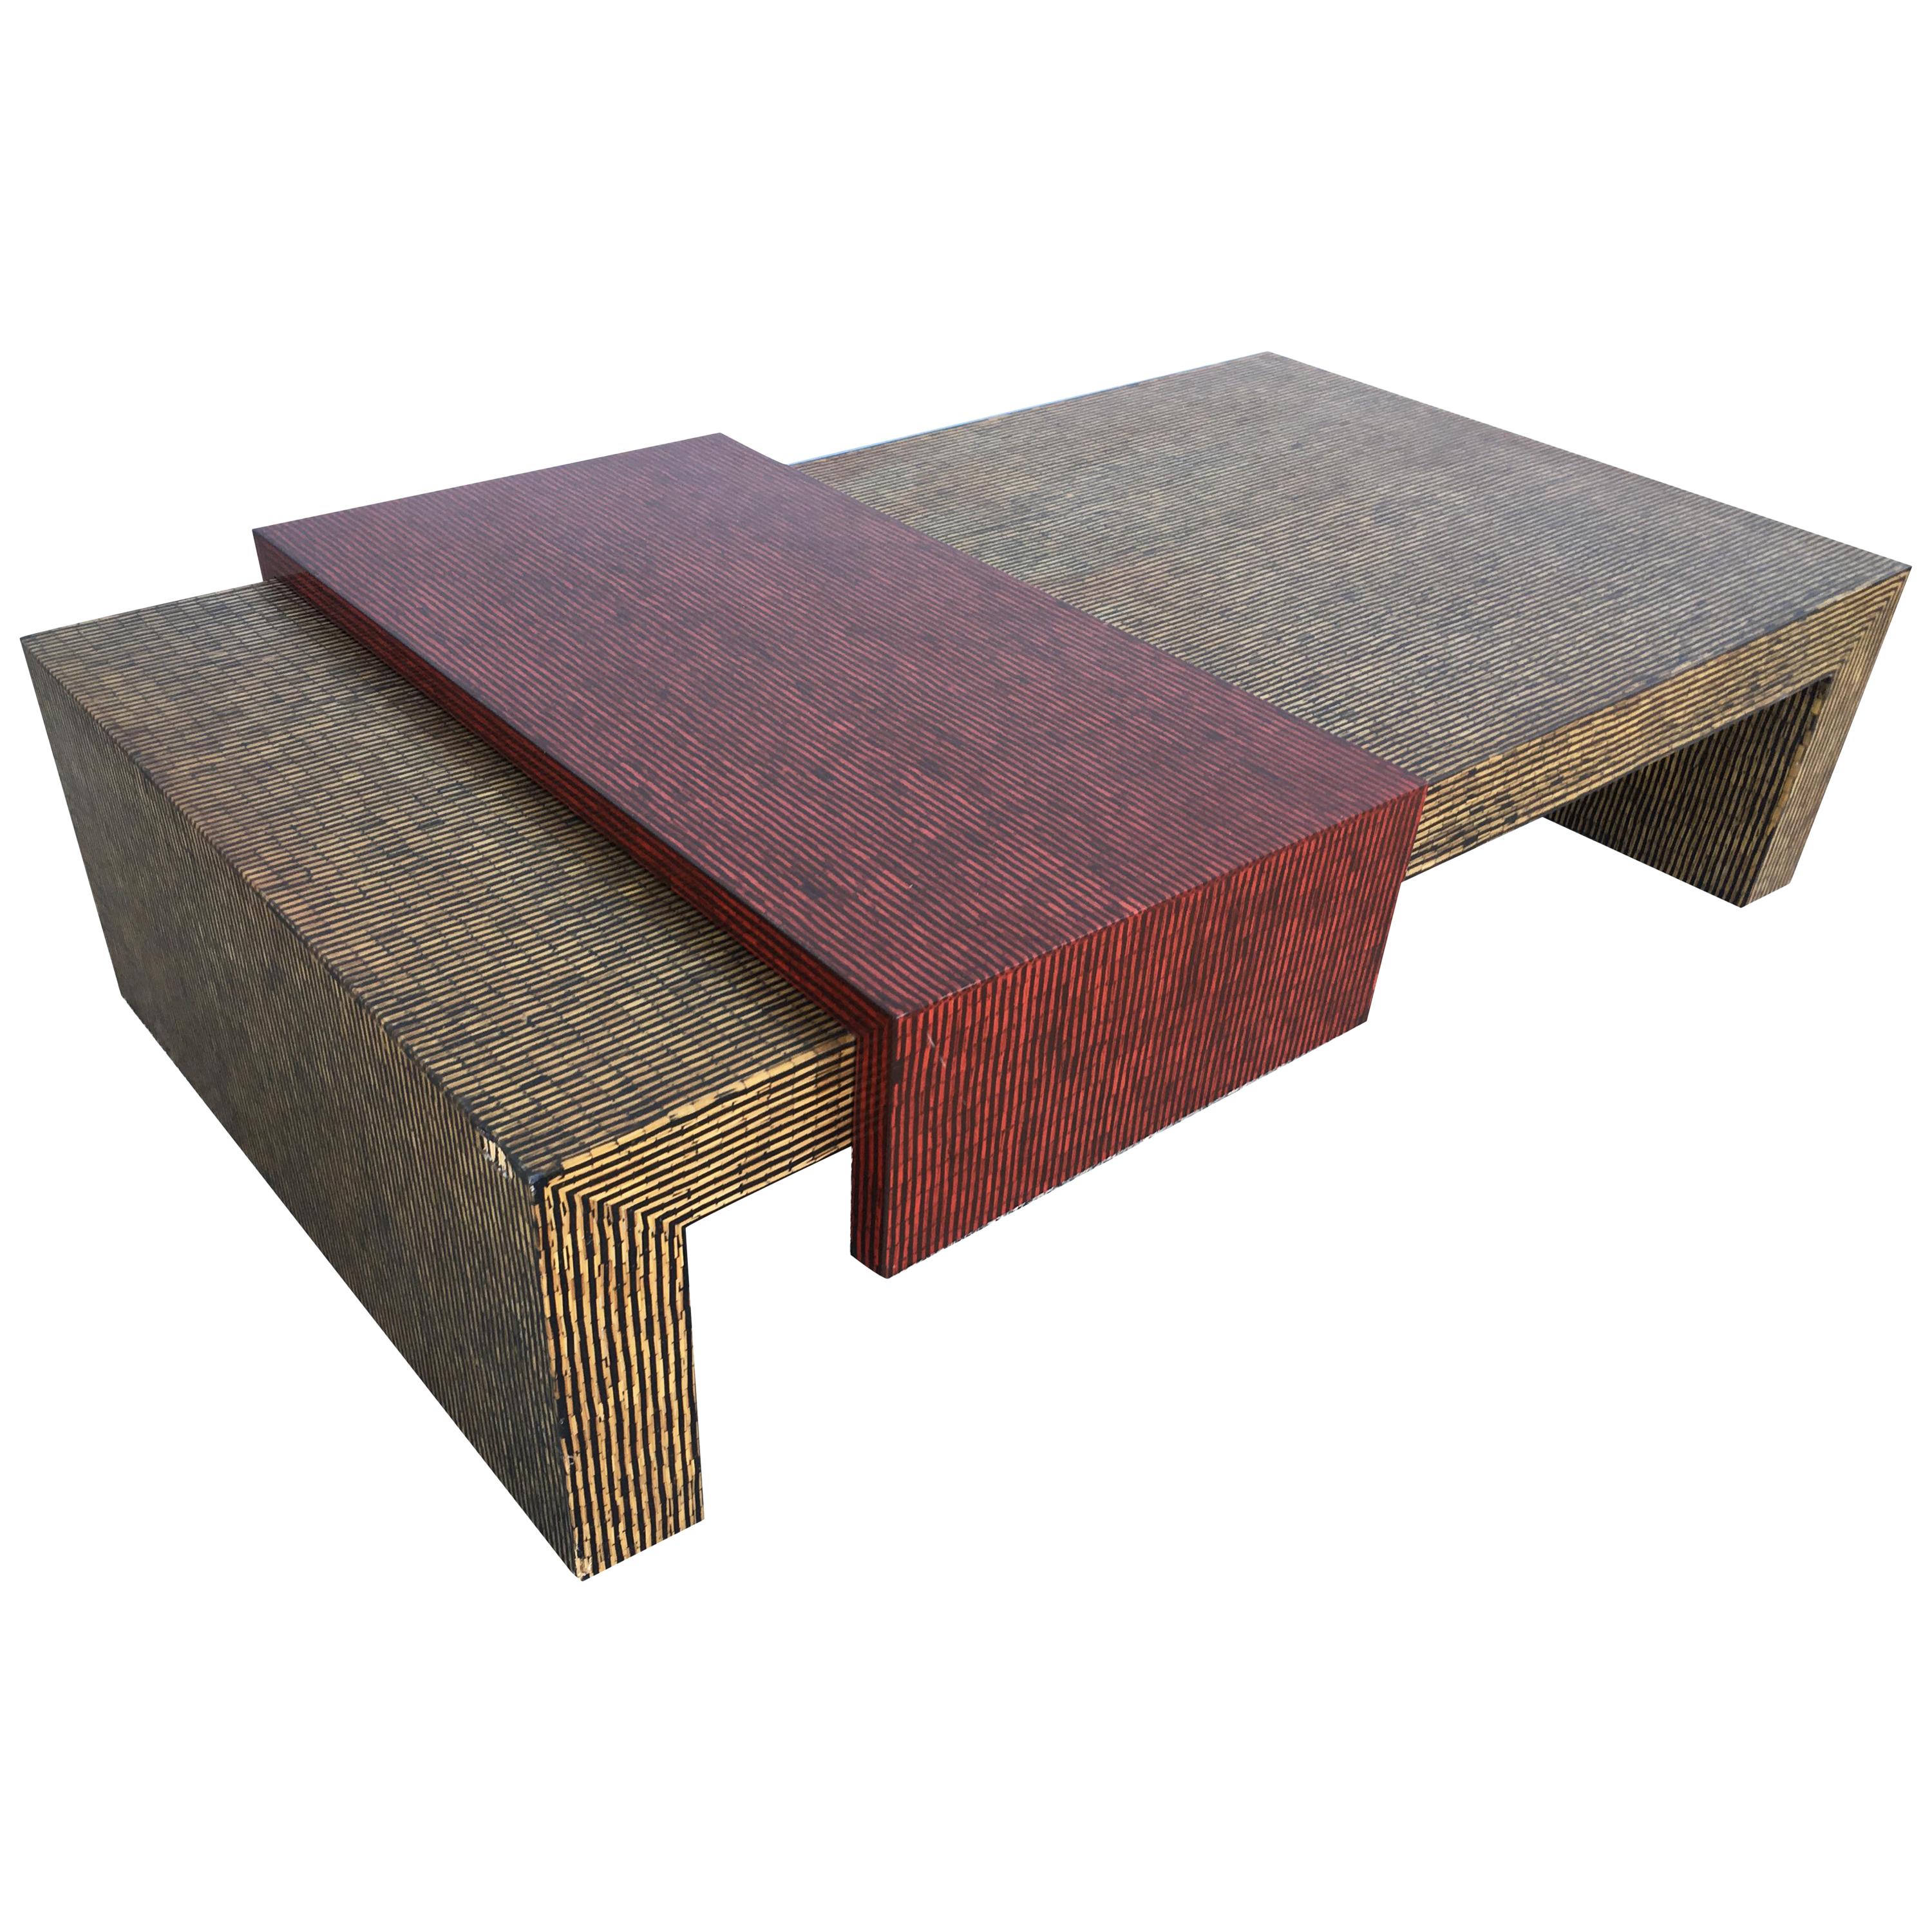 Two-Tone Cubist Style Coffee Table